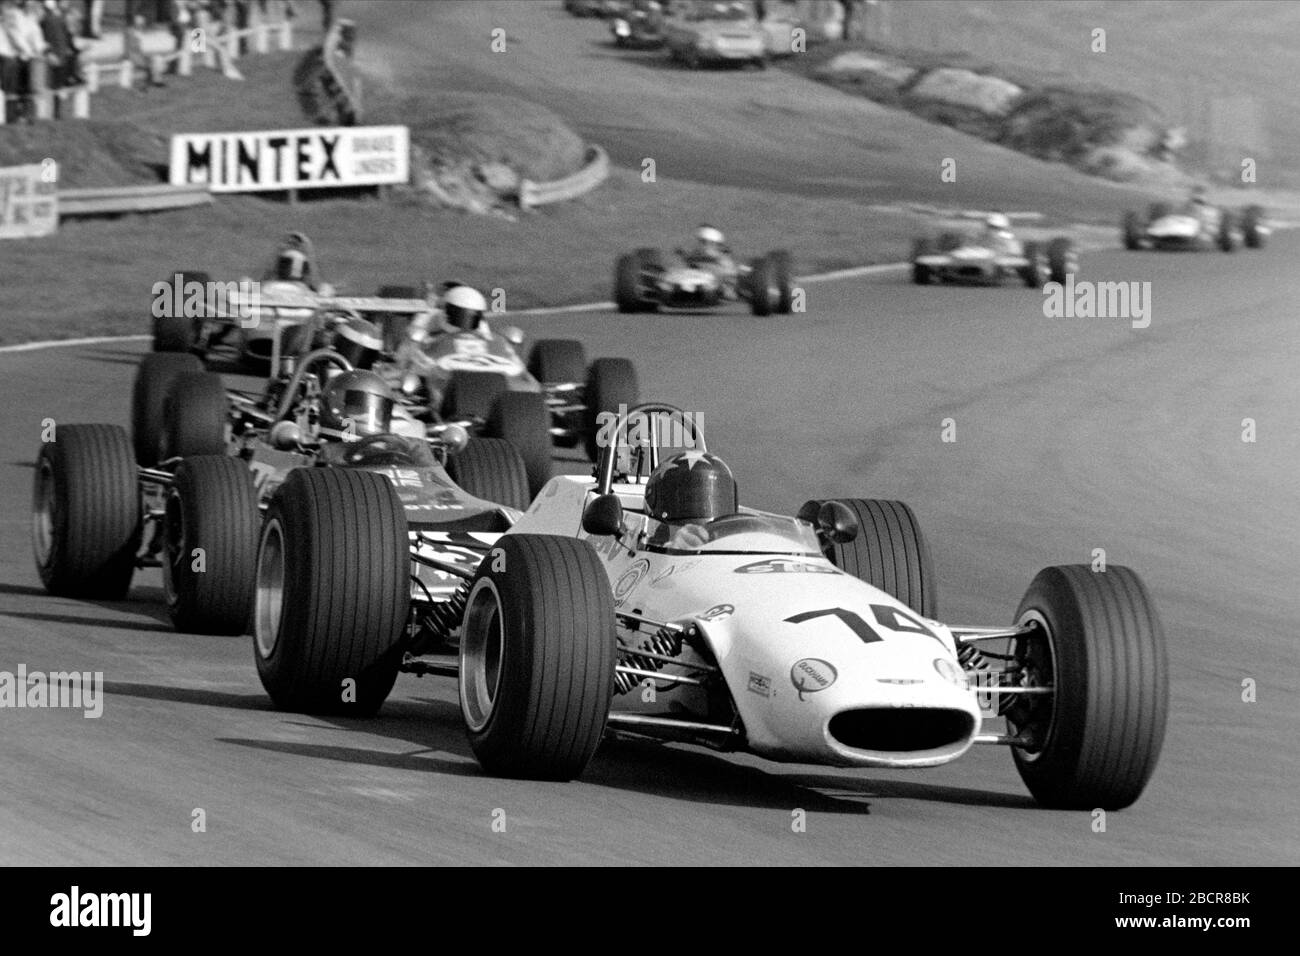 Barrie Maskell, E.R. Hall Trophy 1970 B.R.S.C.C. MotorSport - Shell Super Oil British F3 Championship, Rd 12 M.C.D. Lombank British F3 Championship, Rd 13 Brands Hatch Circuit Stock Photo